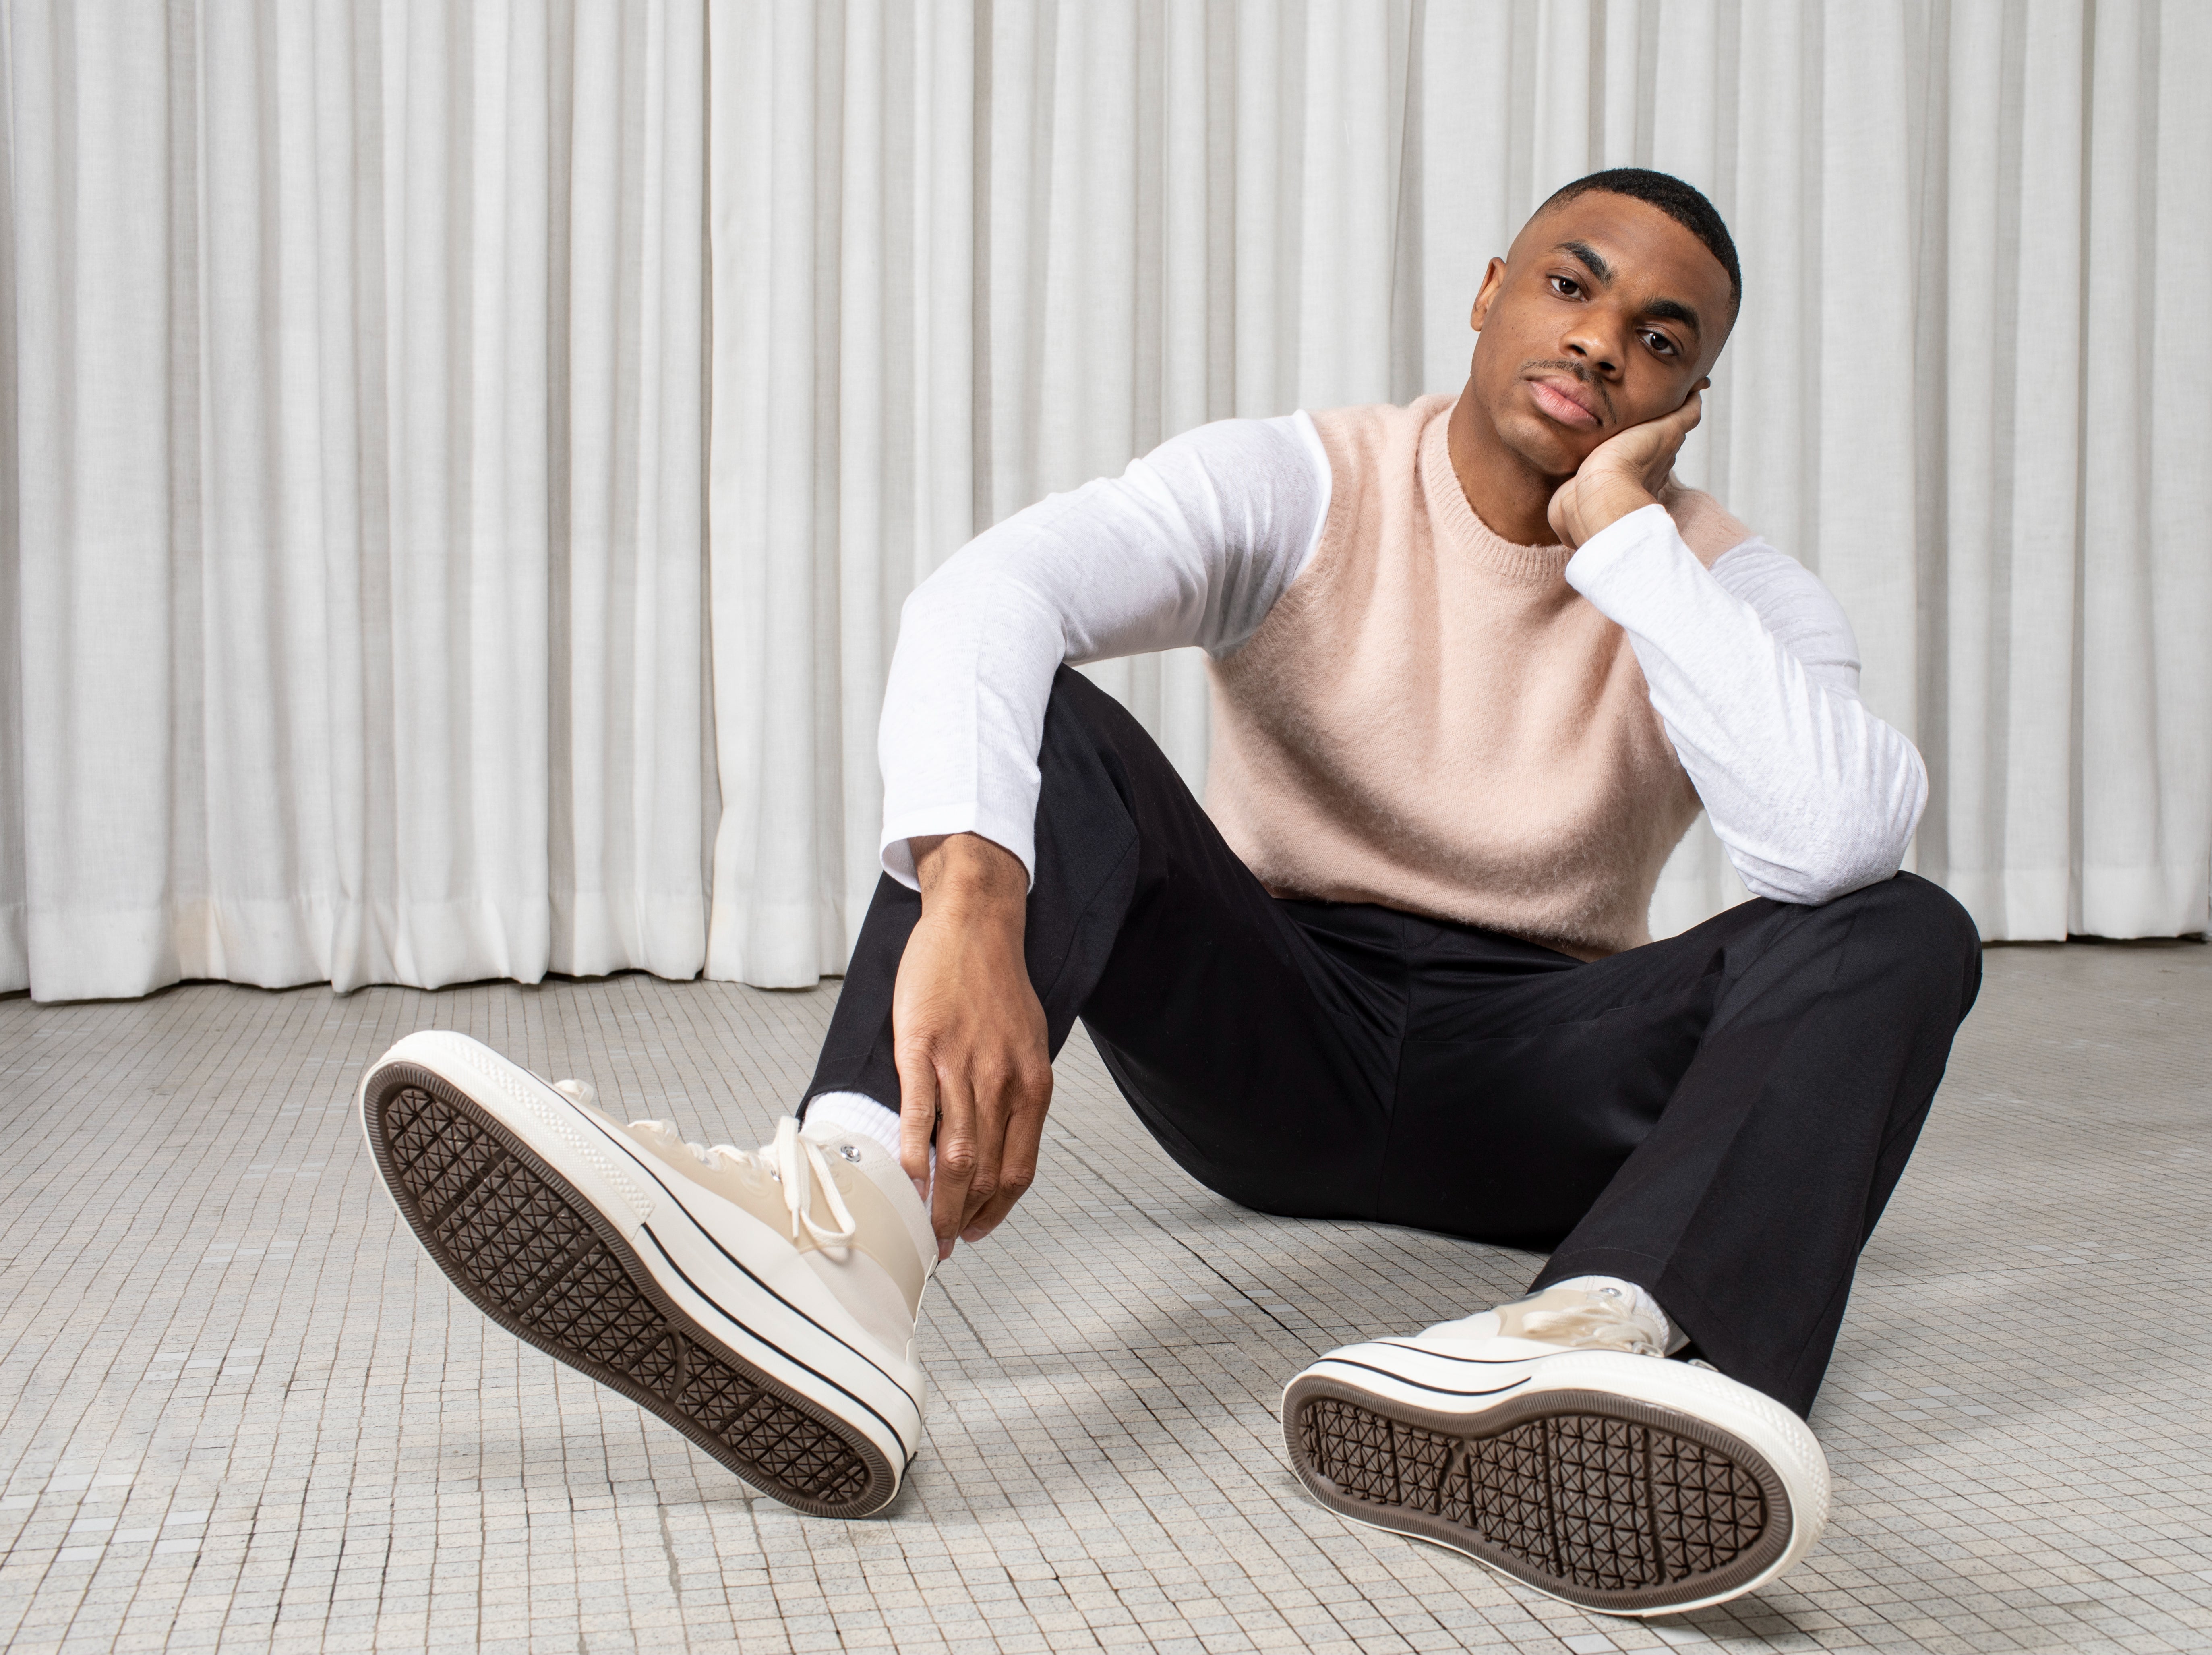 Vince Staples: ‘We’ve seen people market and distribute death and destruction within our communities for decades’